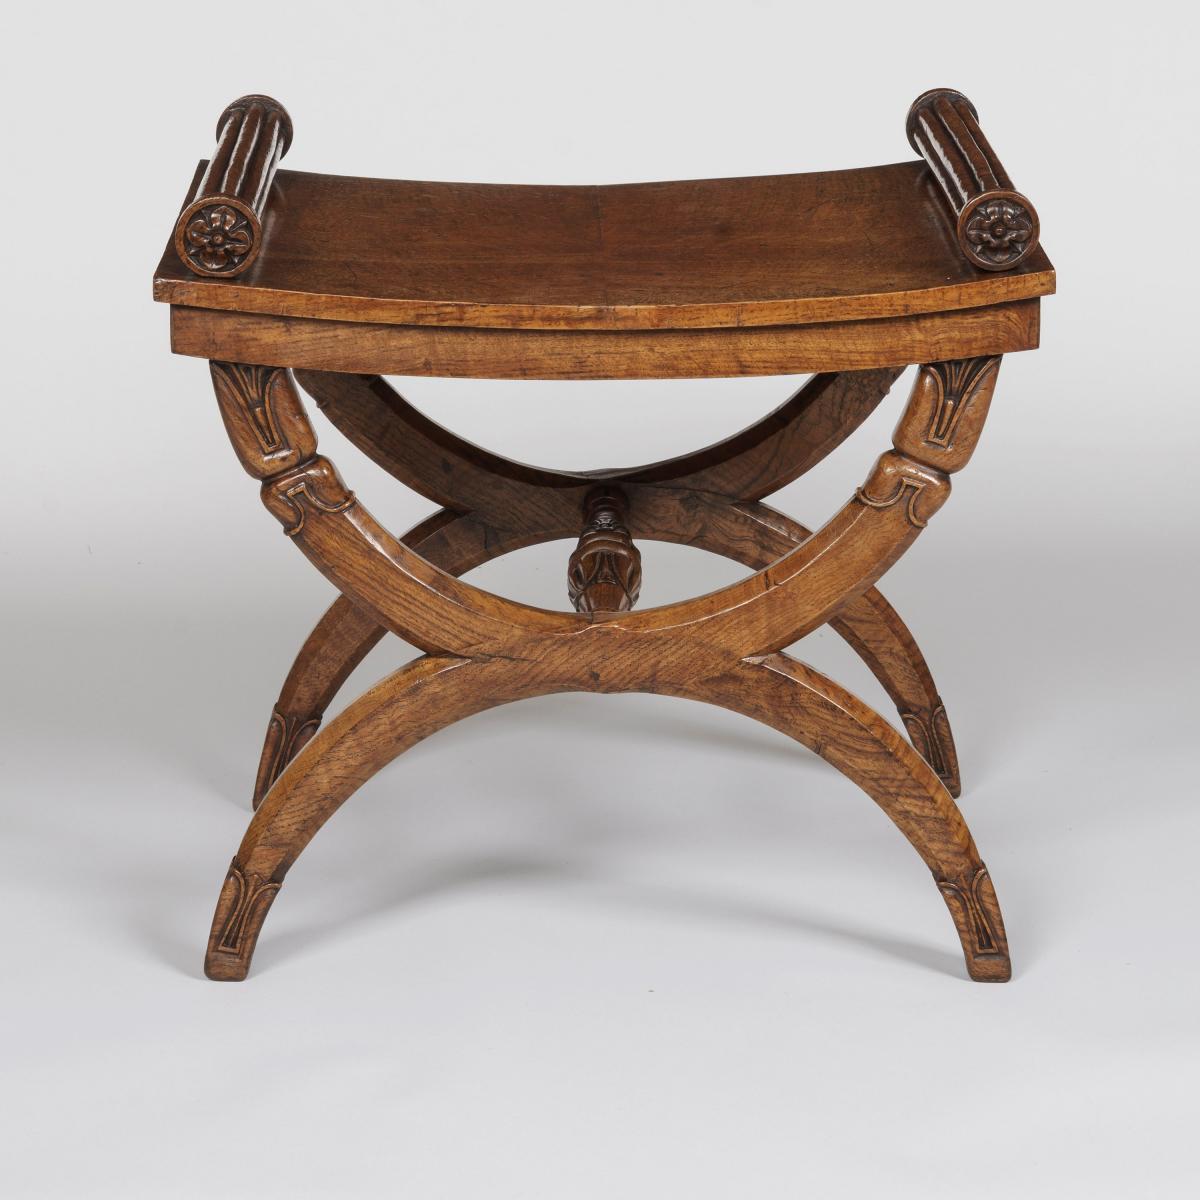 Regency Period X-Frame Stool Possibly by George Bullock